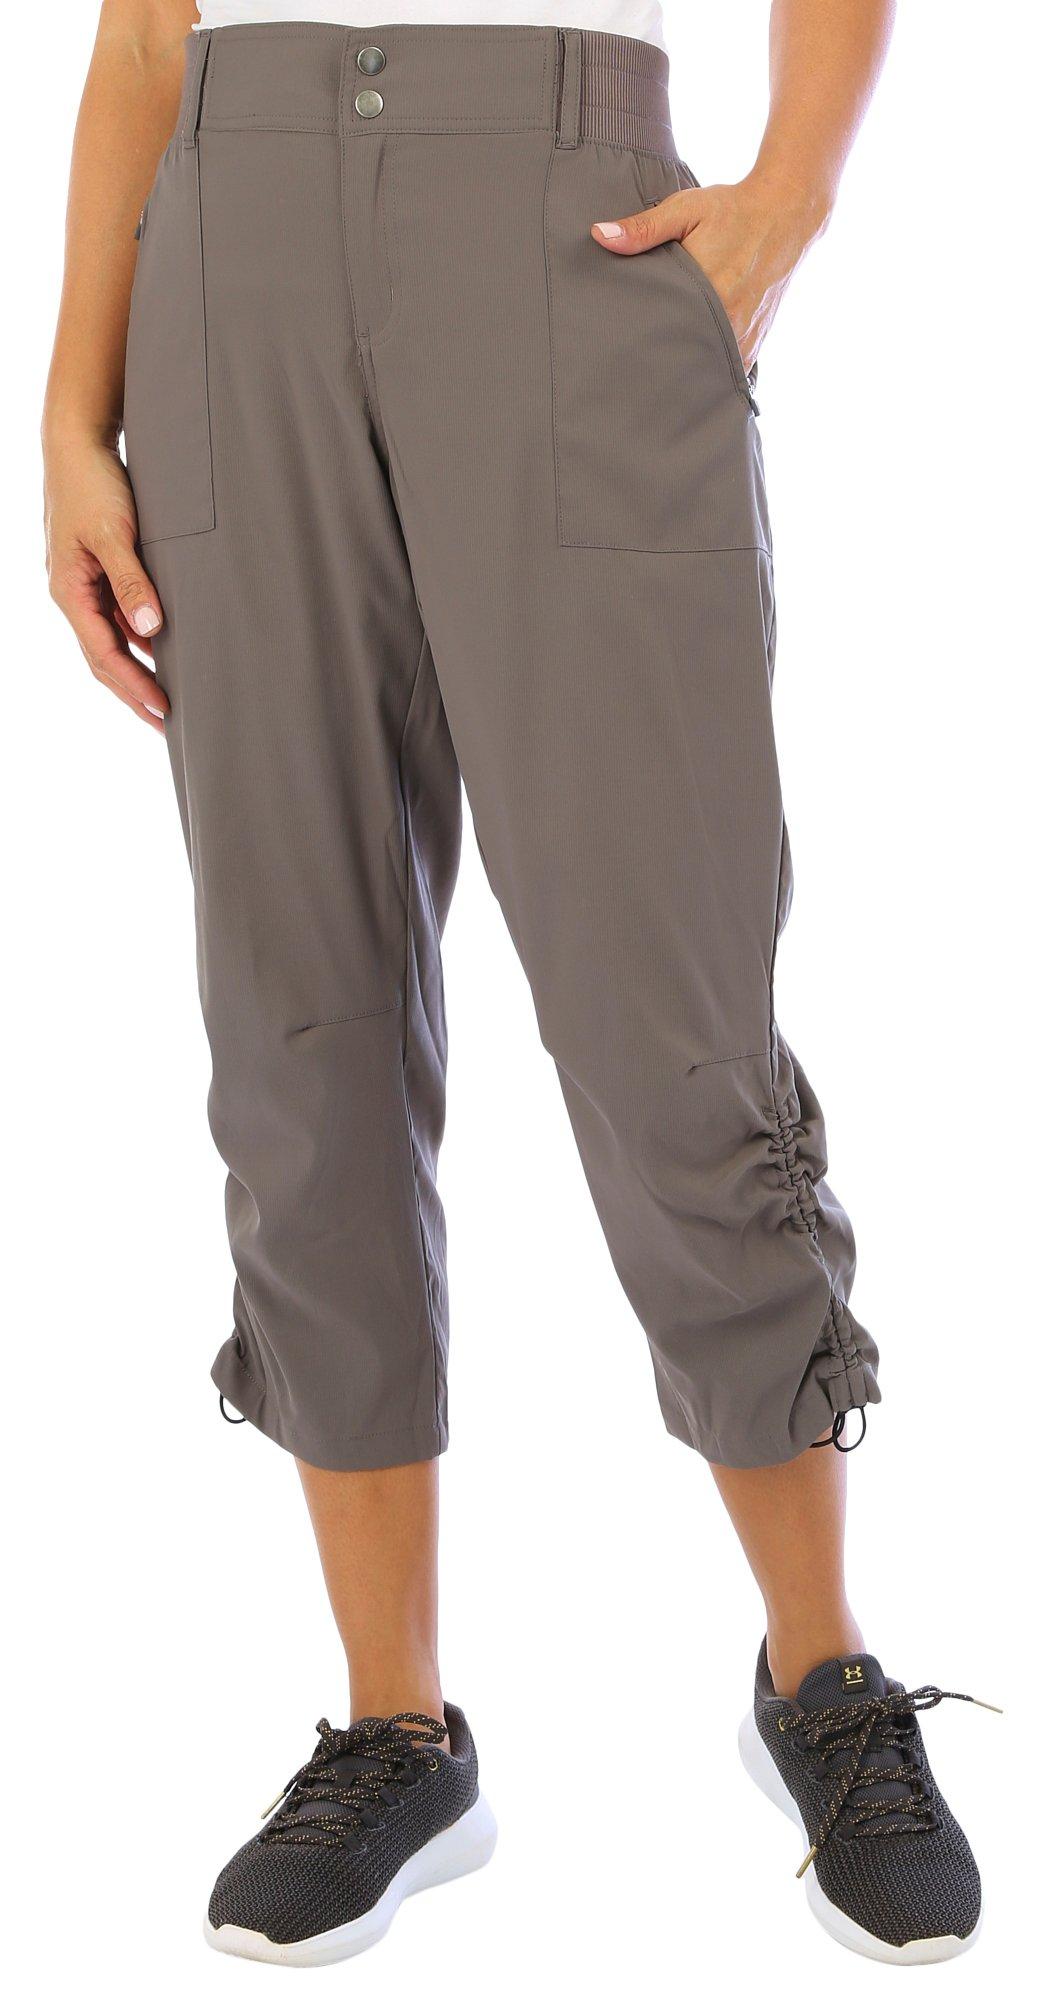 Reel Legends Womens 24 in Solid Cinched Bottom Pants - Charcoal - Medium